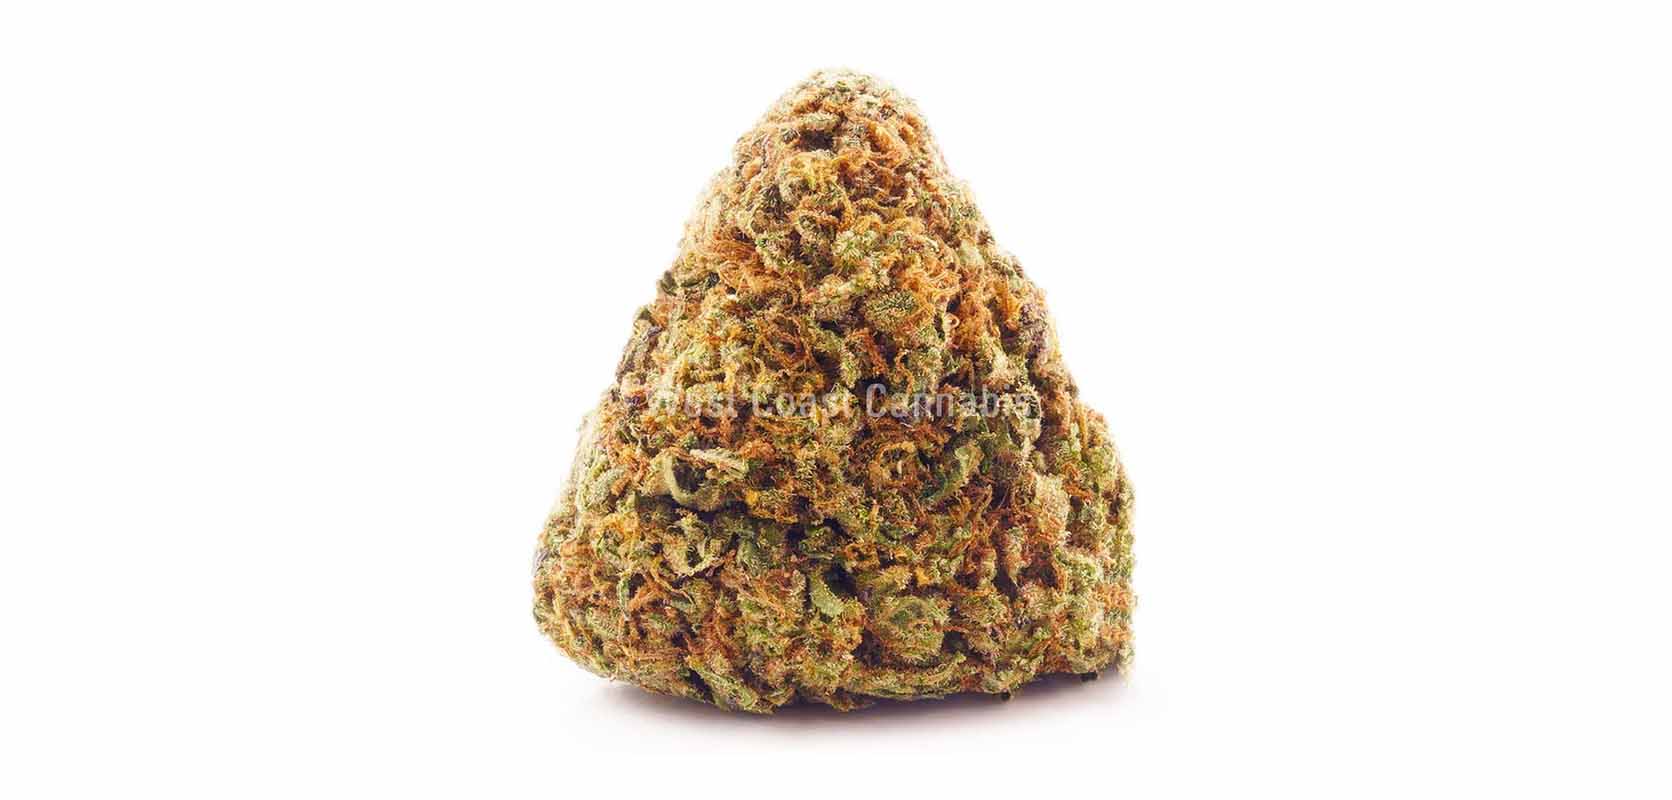 Sundae Driver value buds for sale online at wccannabis online dispensary Canada. 